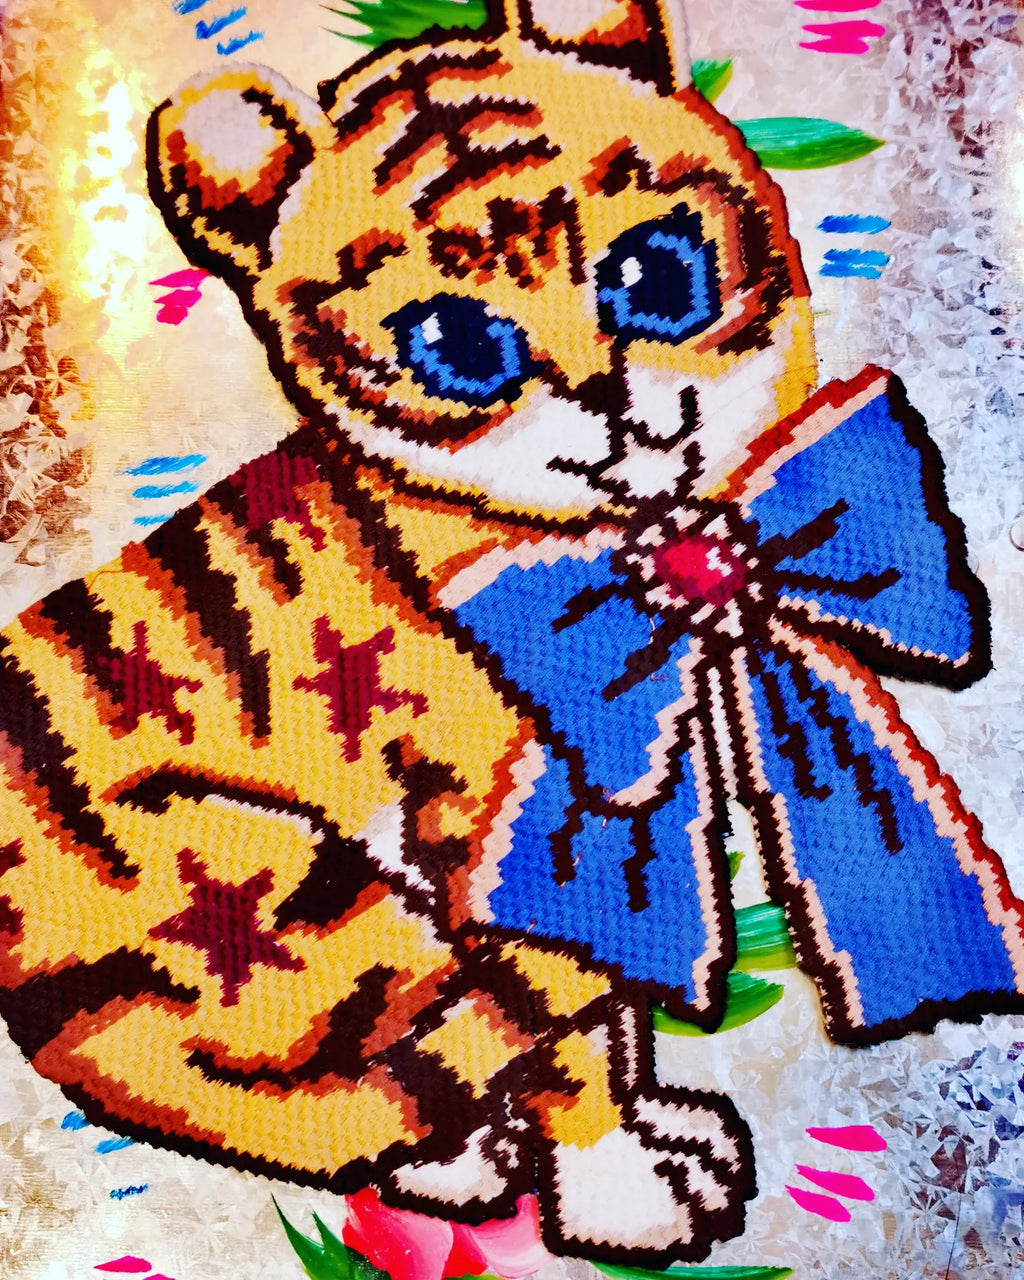 Cute and kitsch kitten patch in needlepoint style embroidery to add to your own needlepoints or clothes and cushions, decorate everything!!

26 x 23cm

Cotton

